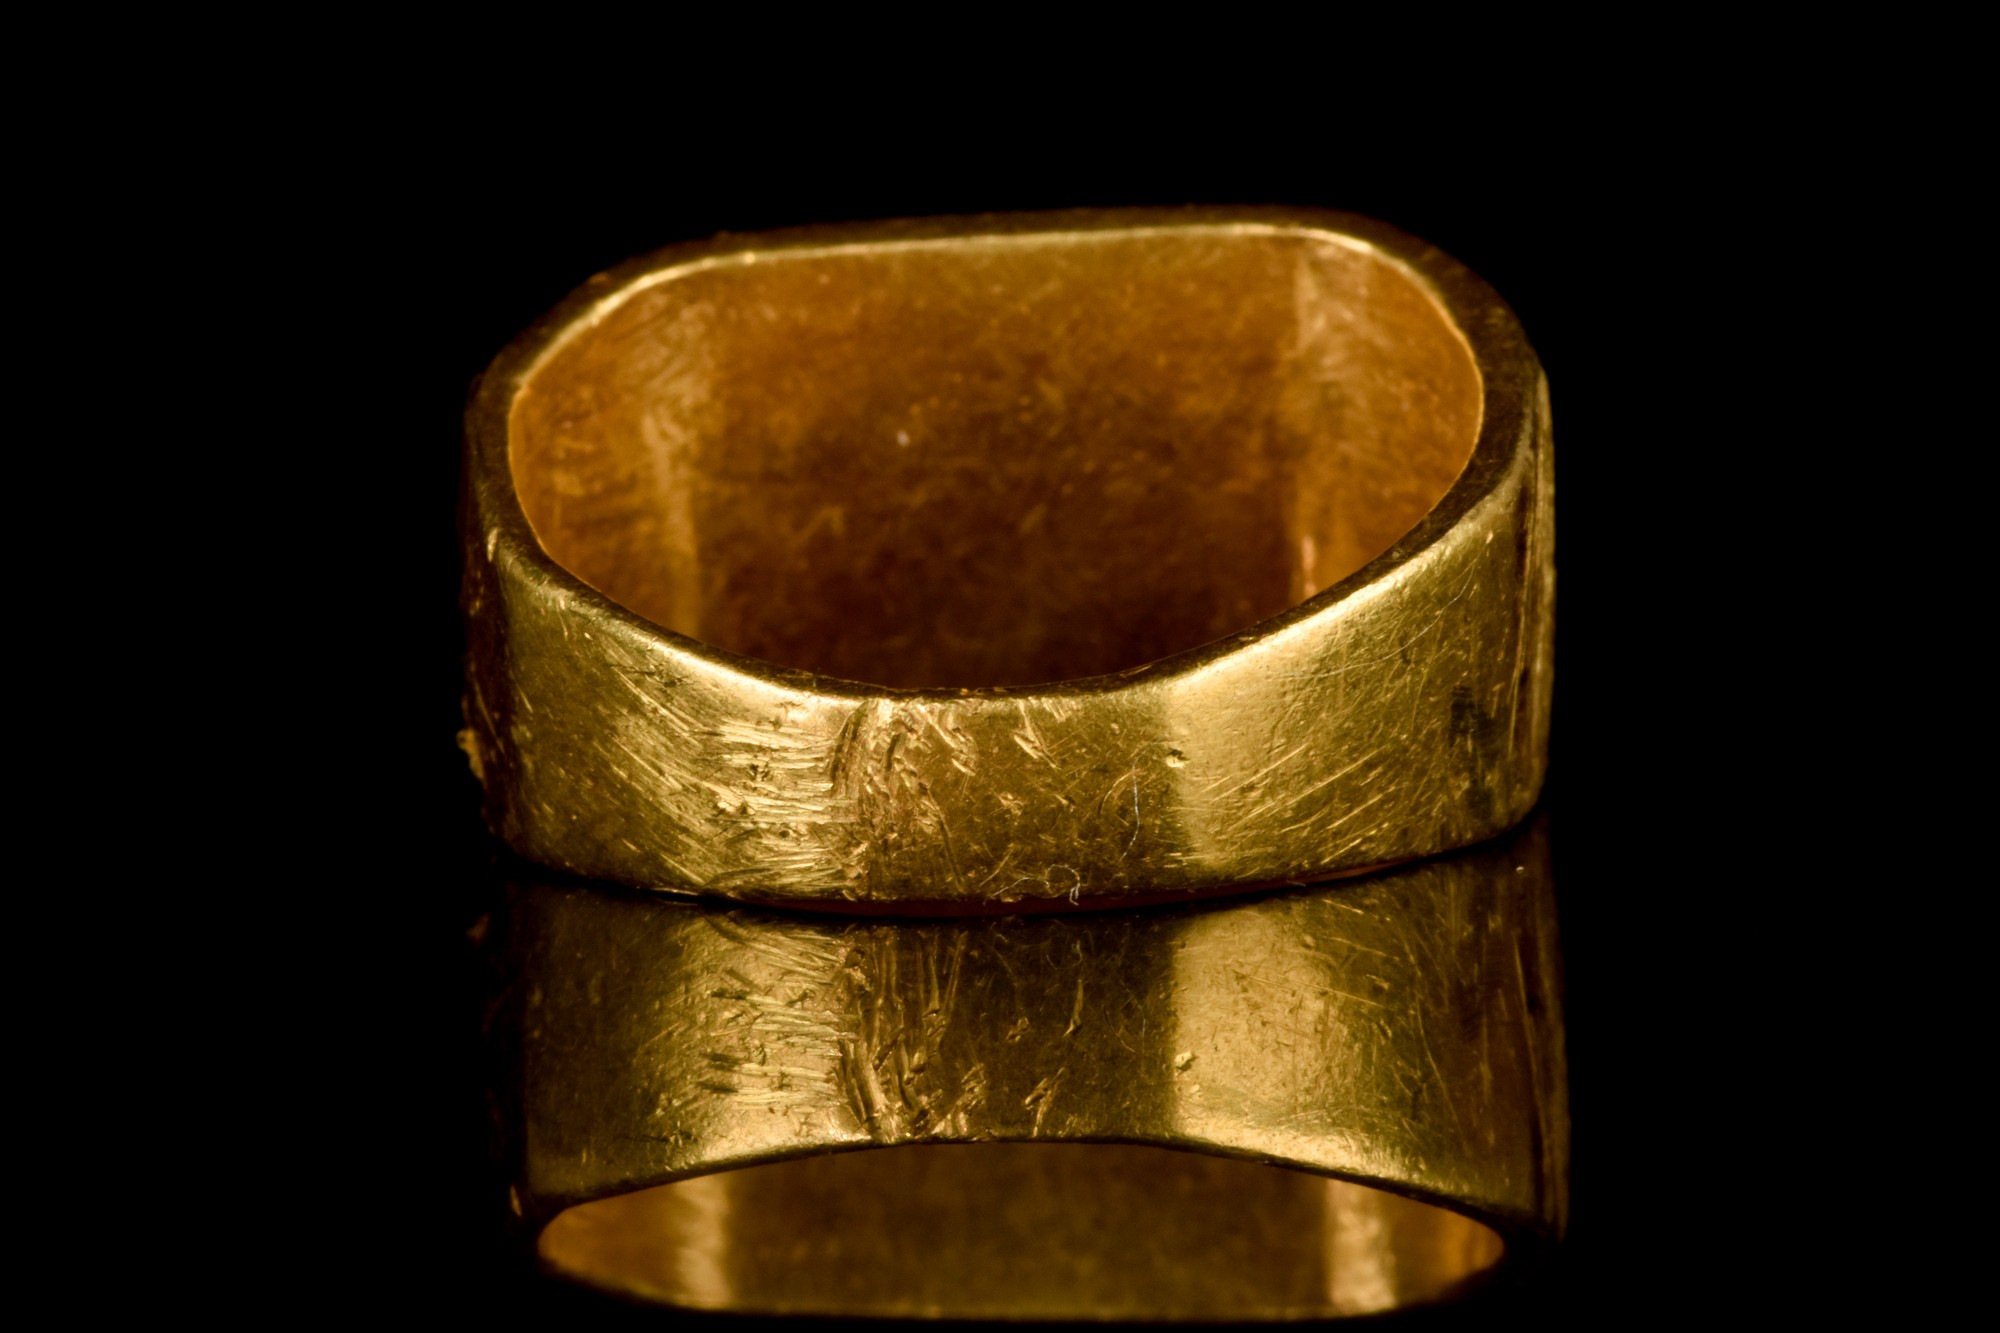 BYZANTINE GOLD MARRIAGE RING WITH OMONIA INSCRIPTION - Image 5 of 6